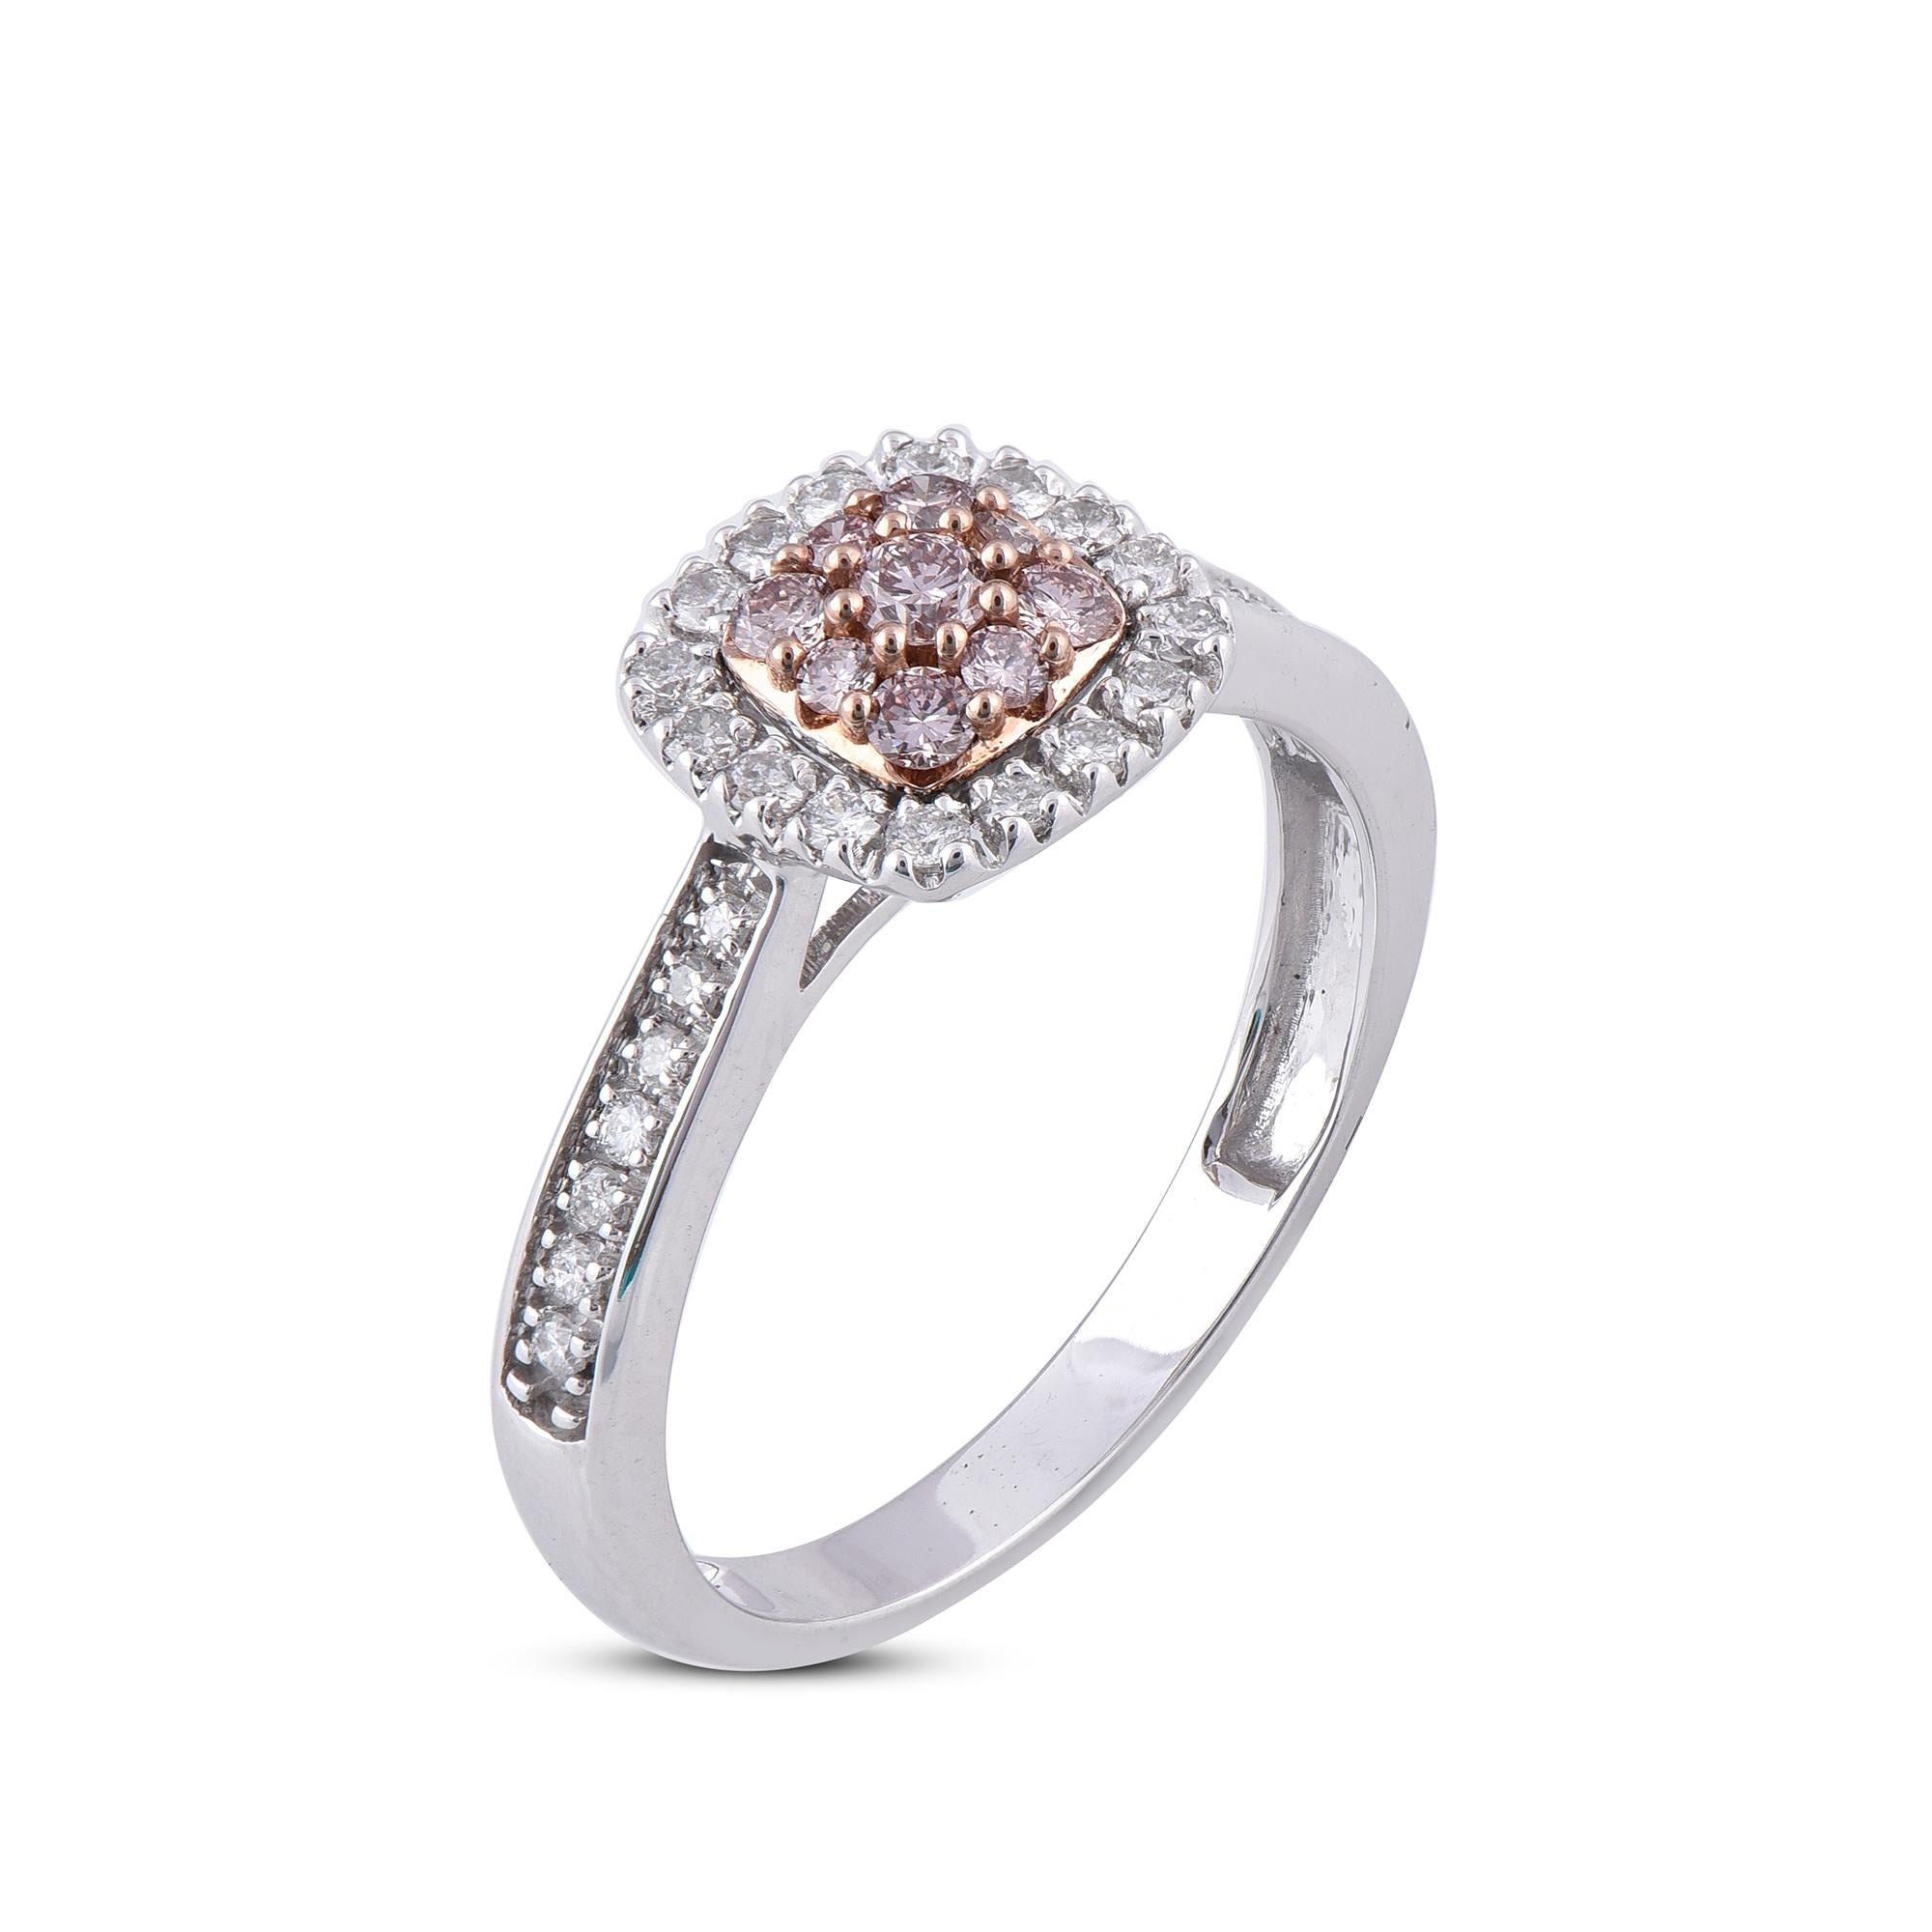 Honor the women you love with this designer cushion shaped diamond engagement ring is expertly crafted in 18 Karat white and rose gold and features 30 white and 9 pink diamond set in micro-prong and prong setting. This engagement ring has high